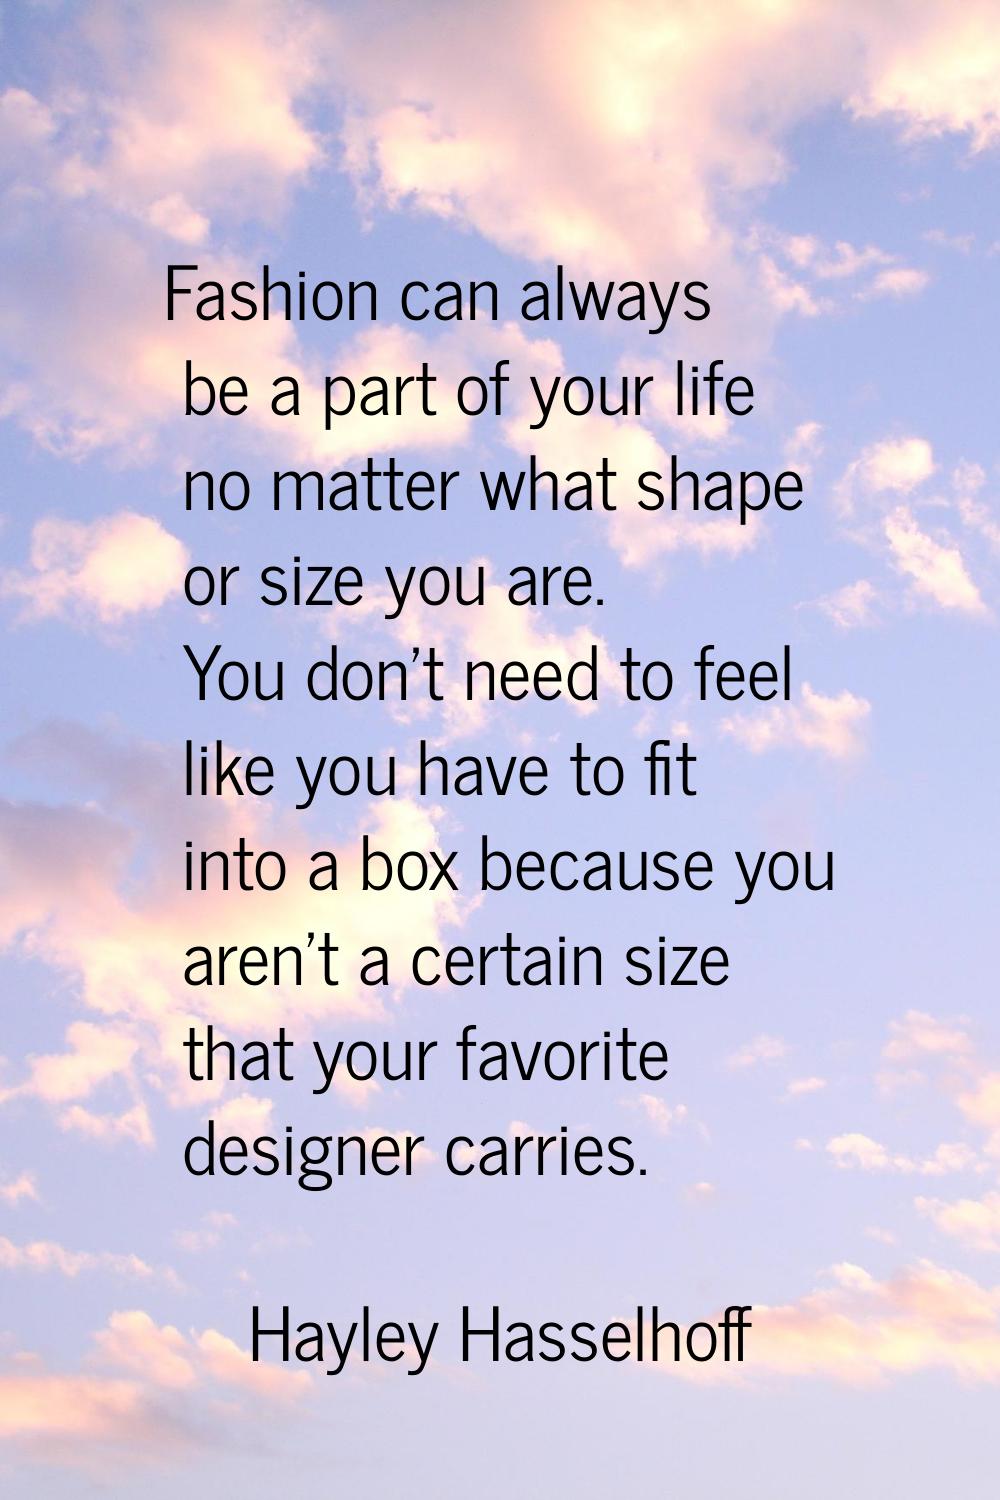 Fashion can always be a part of your life no matter what shape or size you are. You don't need to f